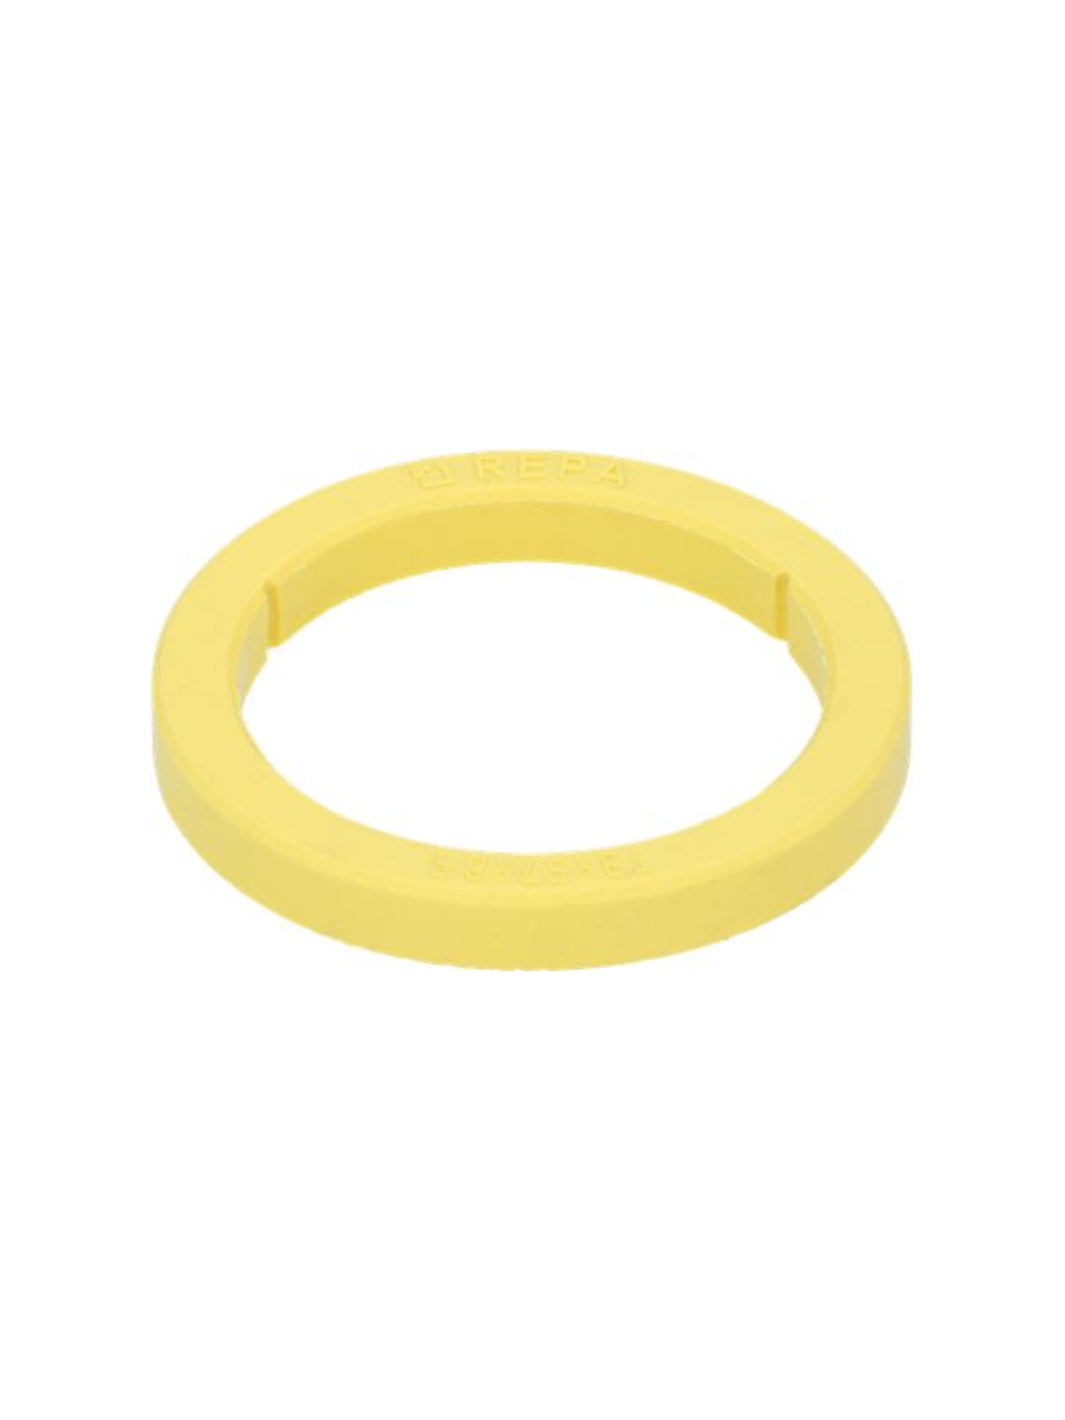 REPA Silicone E61 Group Gasket (8.5mm)